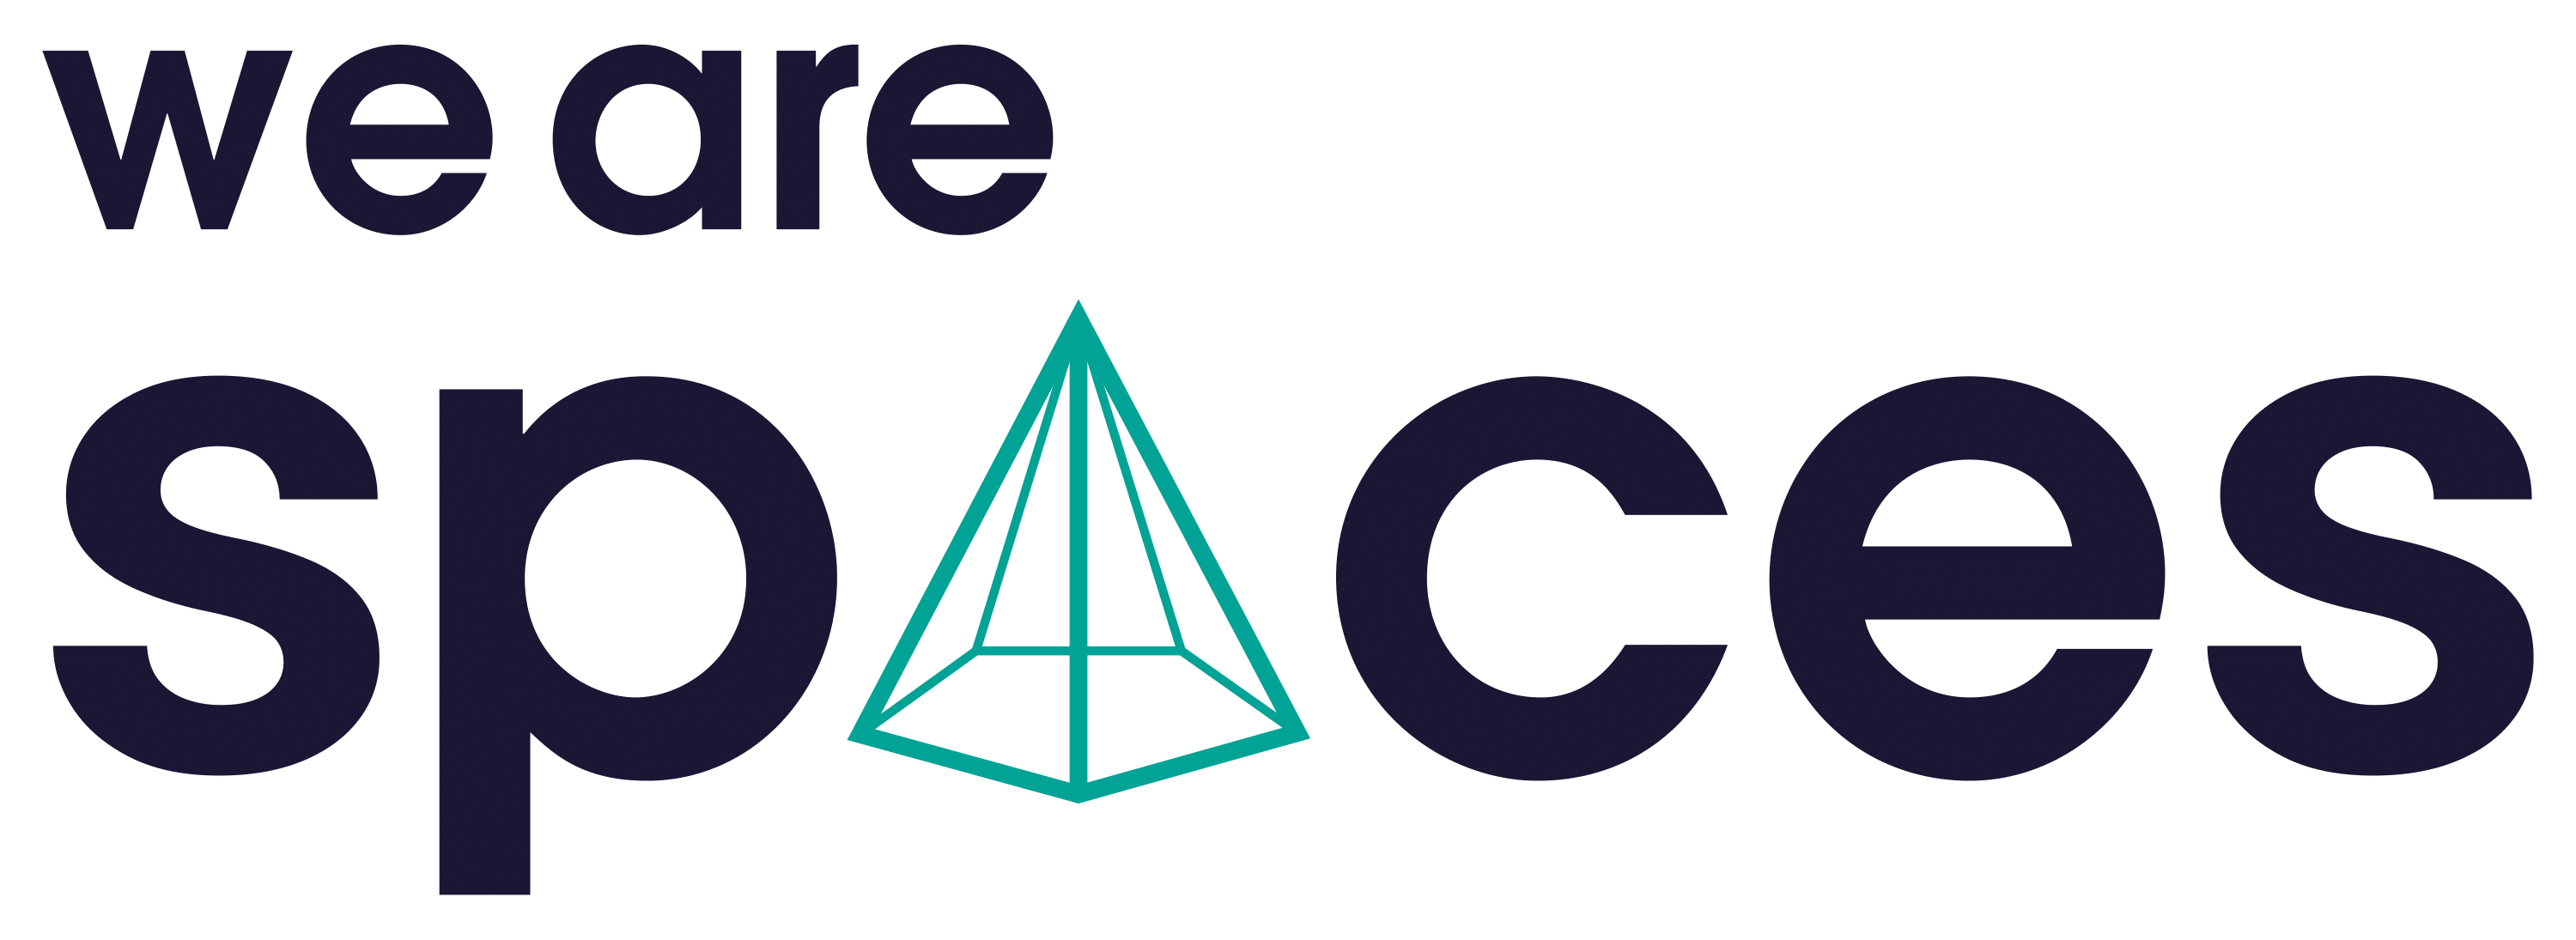 We are spaces logo